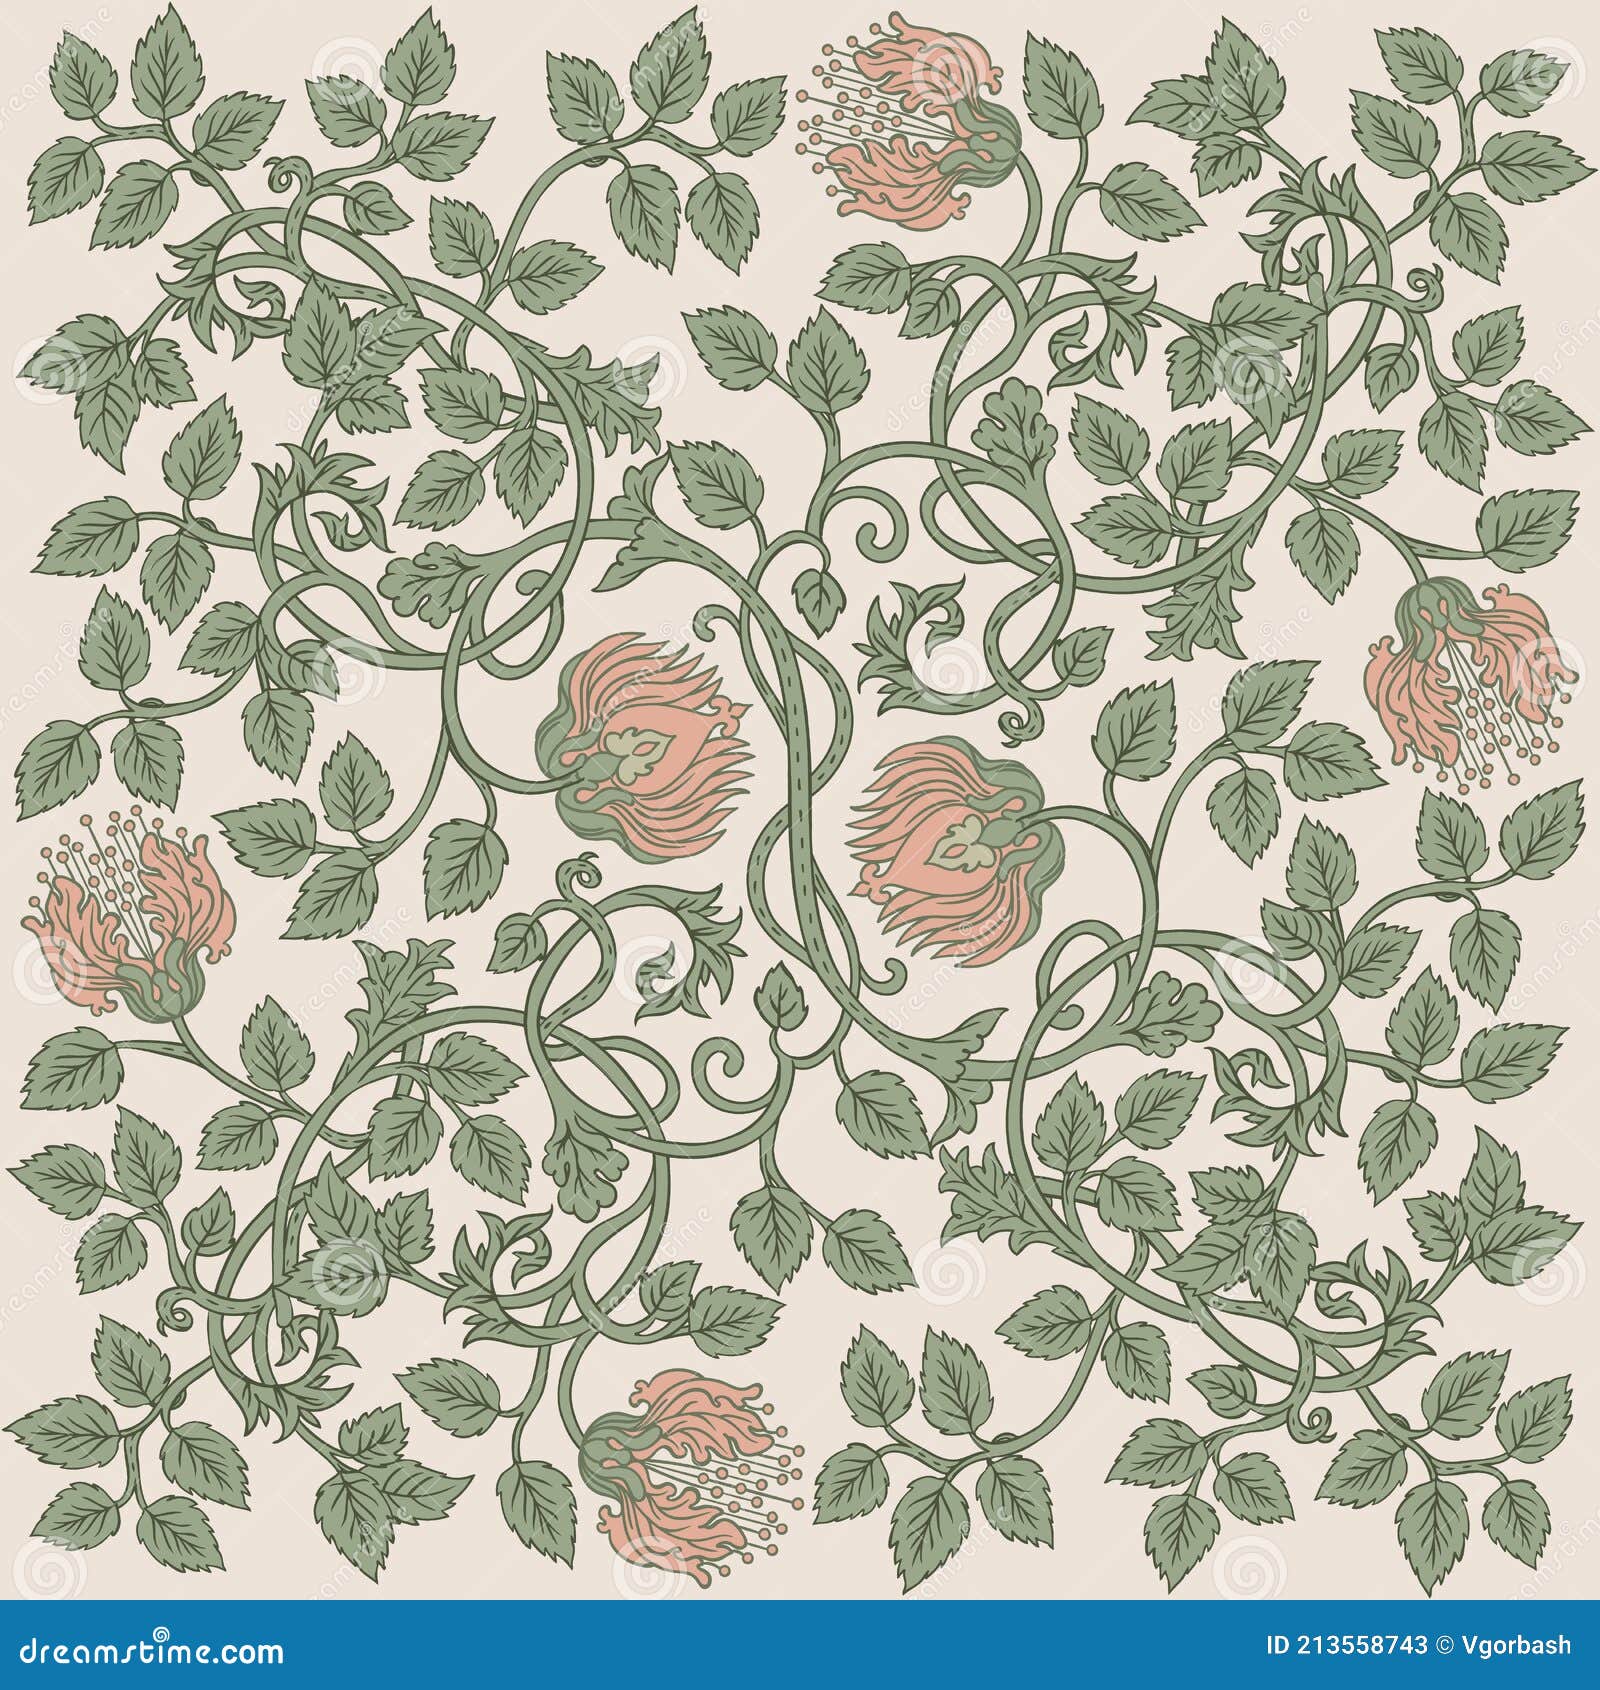 Floral Vintage Seamless Pattern for Retro Wallpapers. Enchanted Vintage  Flowers Stock Vector - Illustration of retro, ornate: 213558743